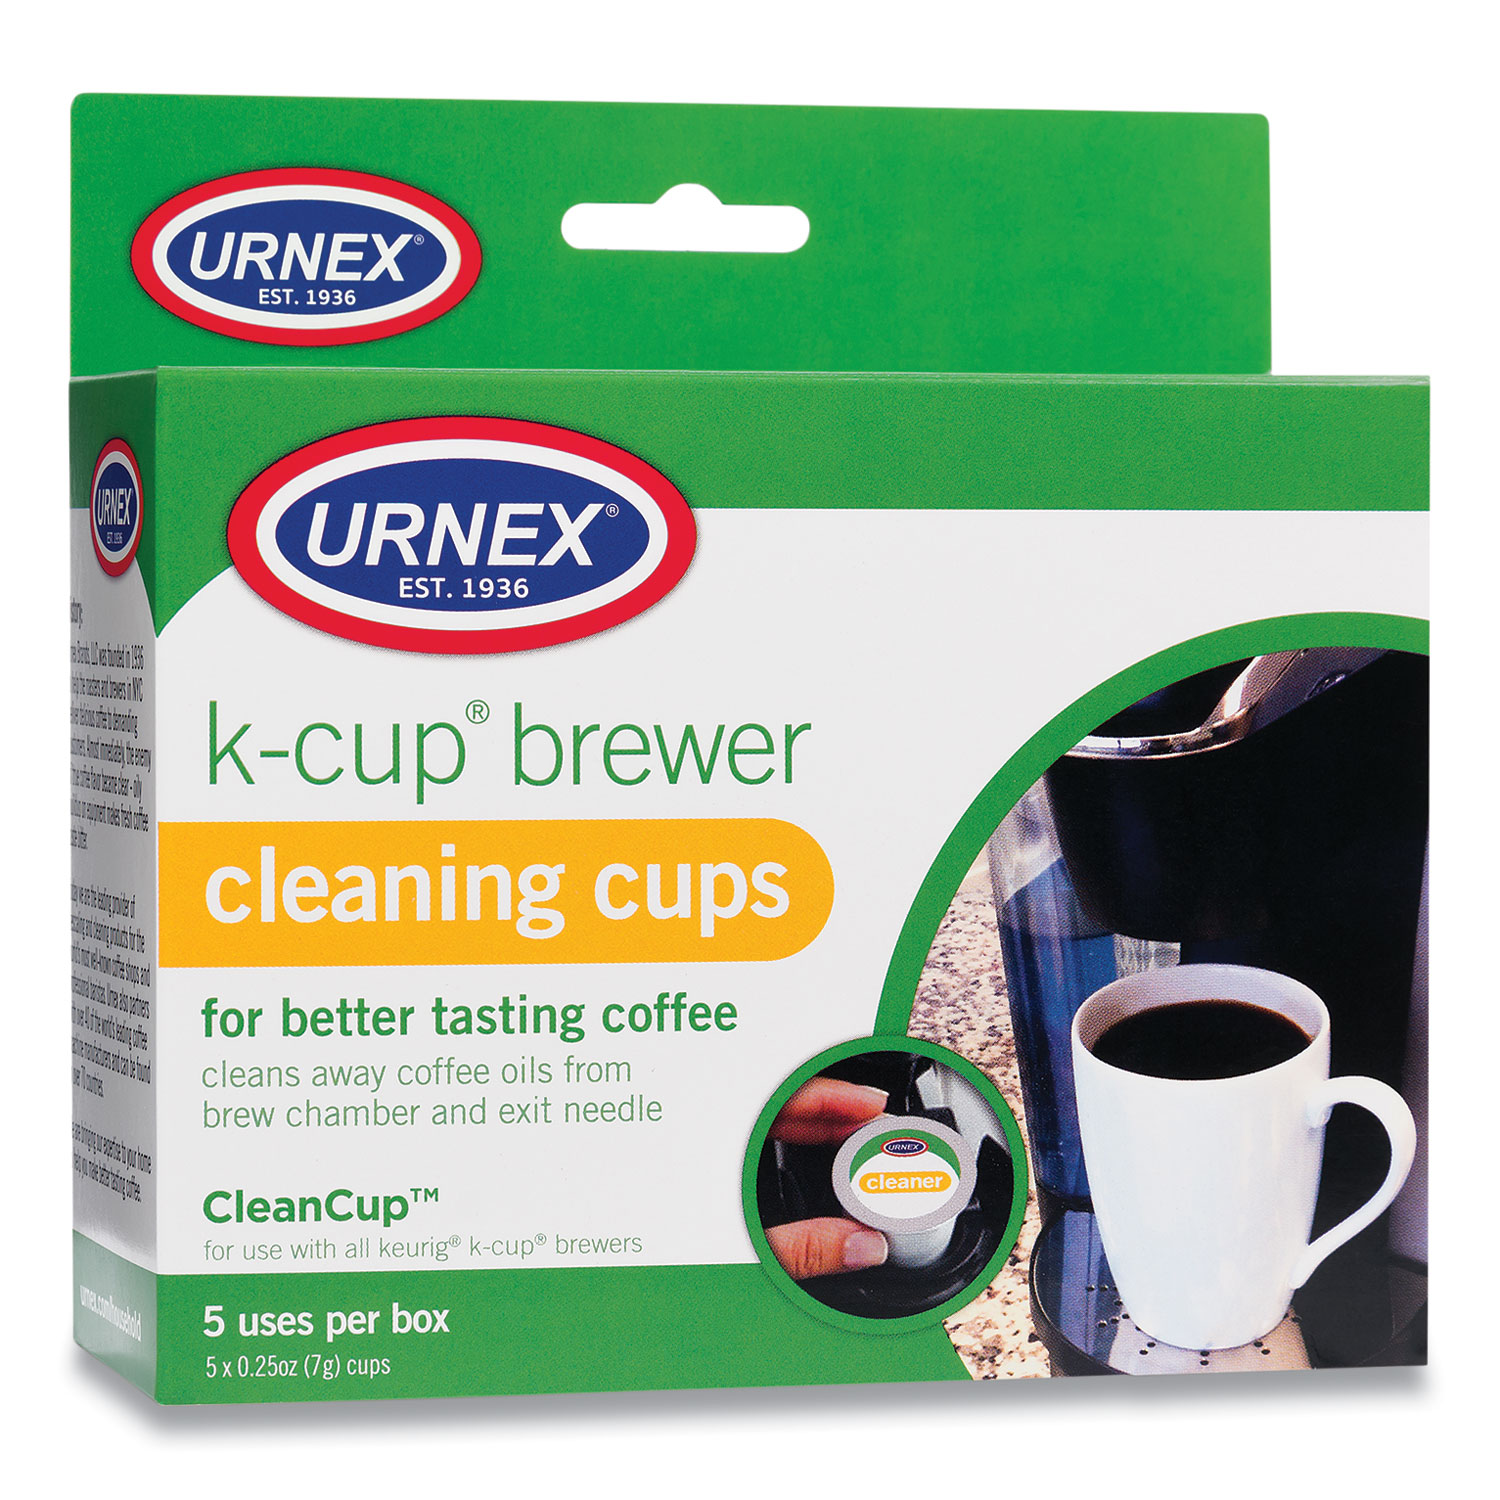  Urnex UBI70135 CleanCup Coffee Pod Brewer Cleaning Cups, 0.25 oz Cup, 5/Pack (URN24396363) 